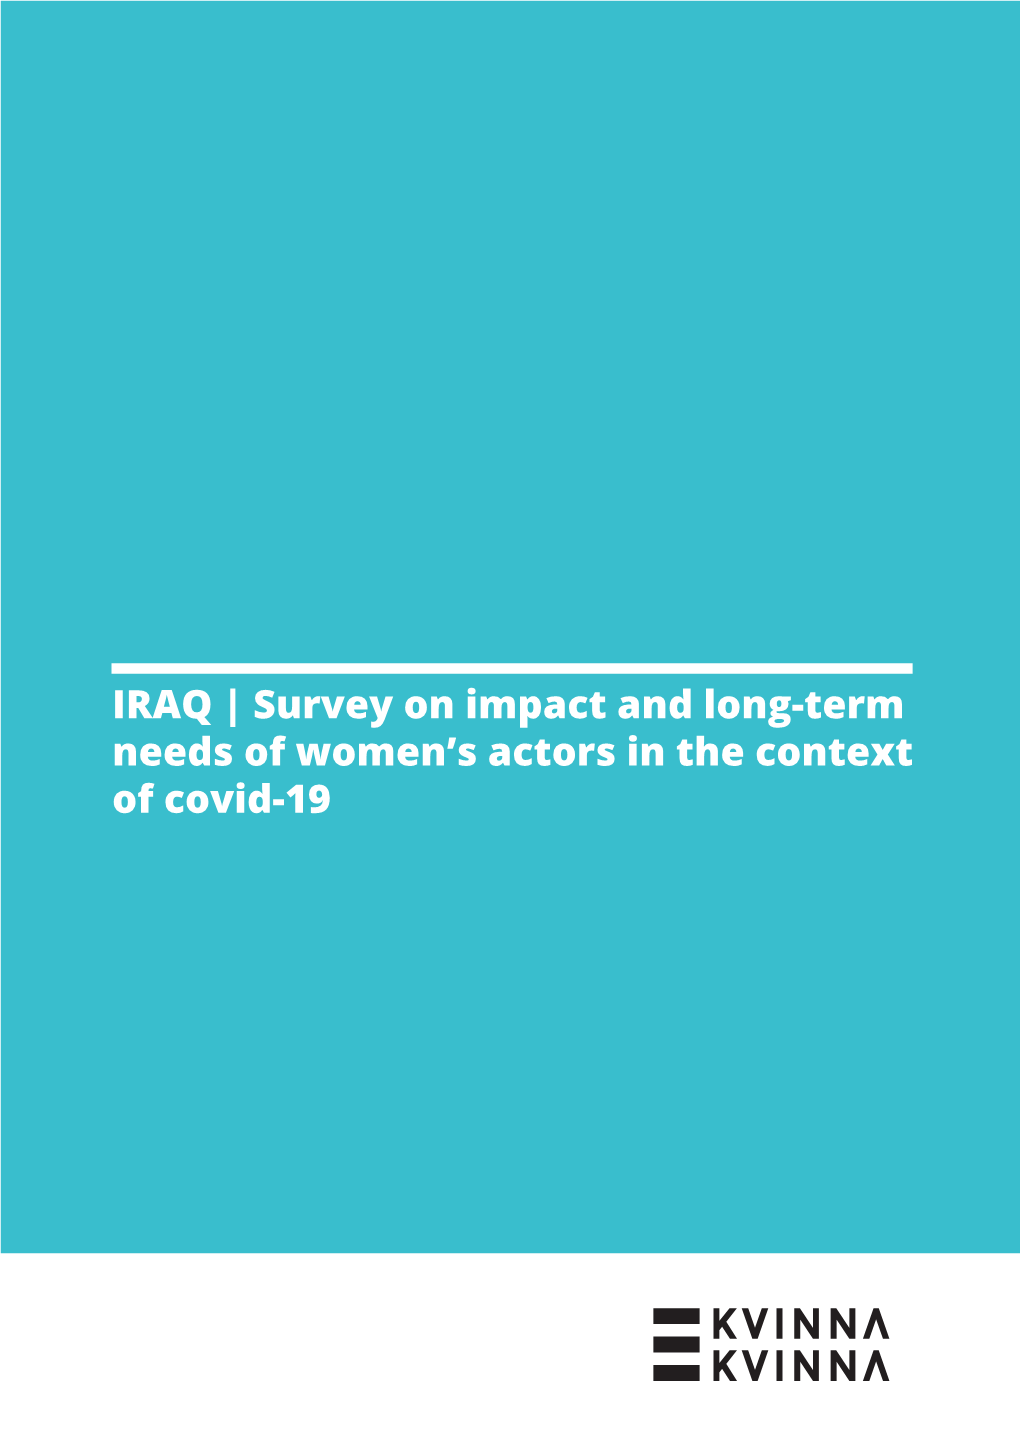 IRAQ | Survey on Impact and Long-Term Needs of Women's Actors in the Context of Covid-19